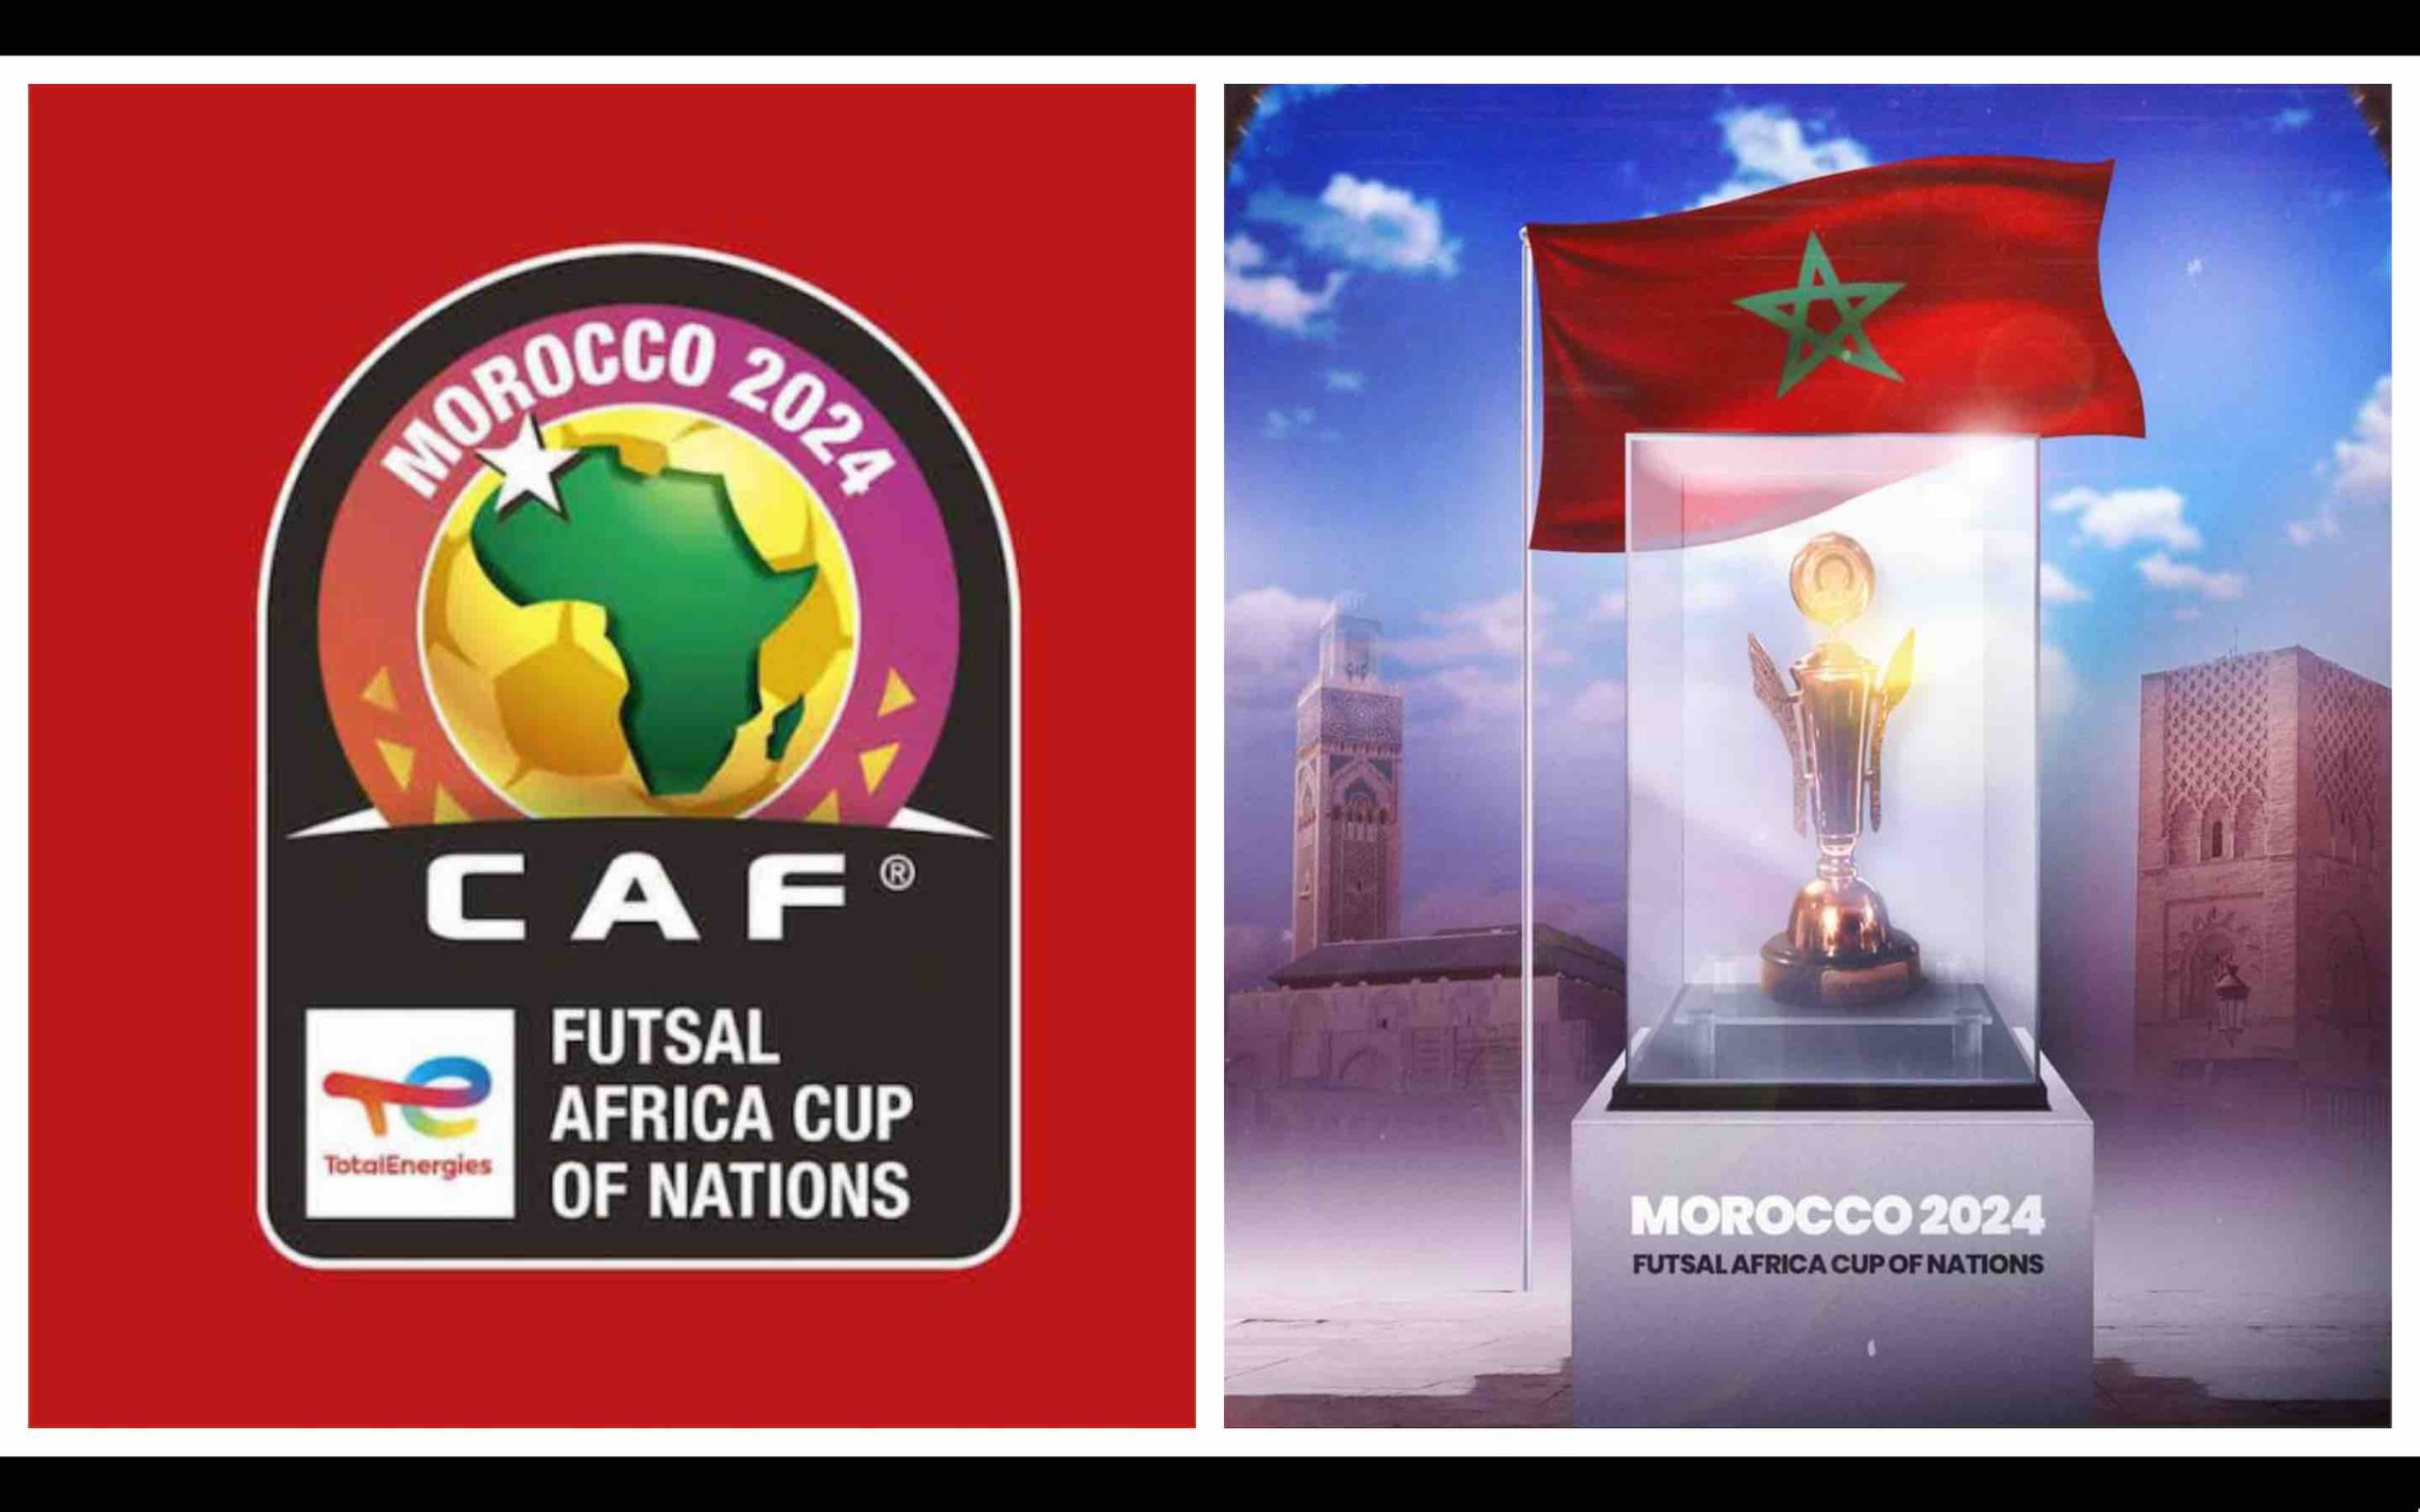 CAN futsal Maroc 2024 Coupe d'Afrique des nations Morocco Africa Cup Of Nations